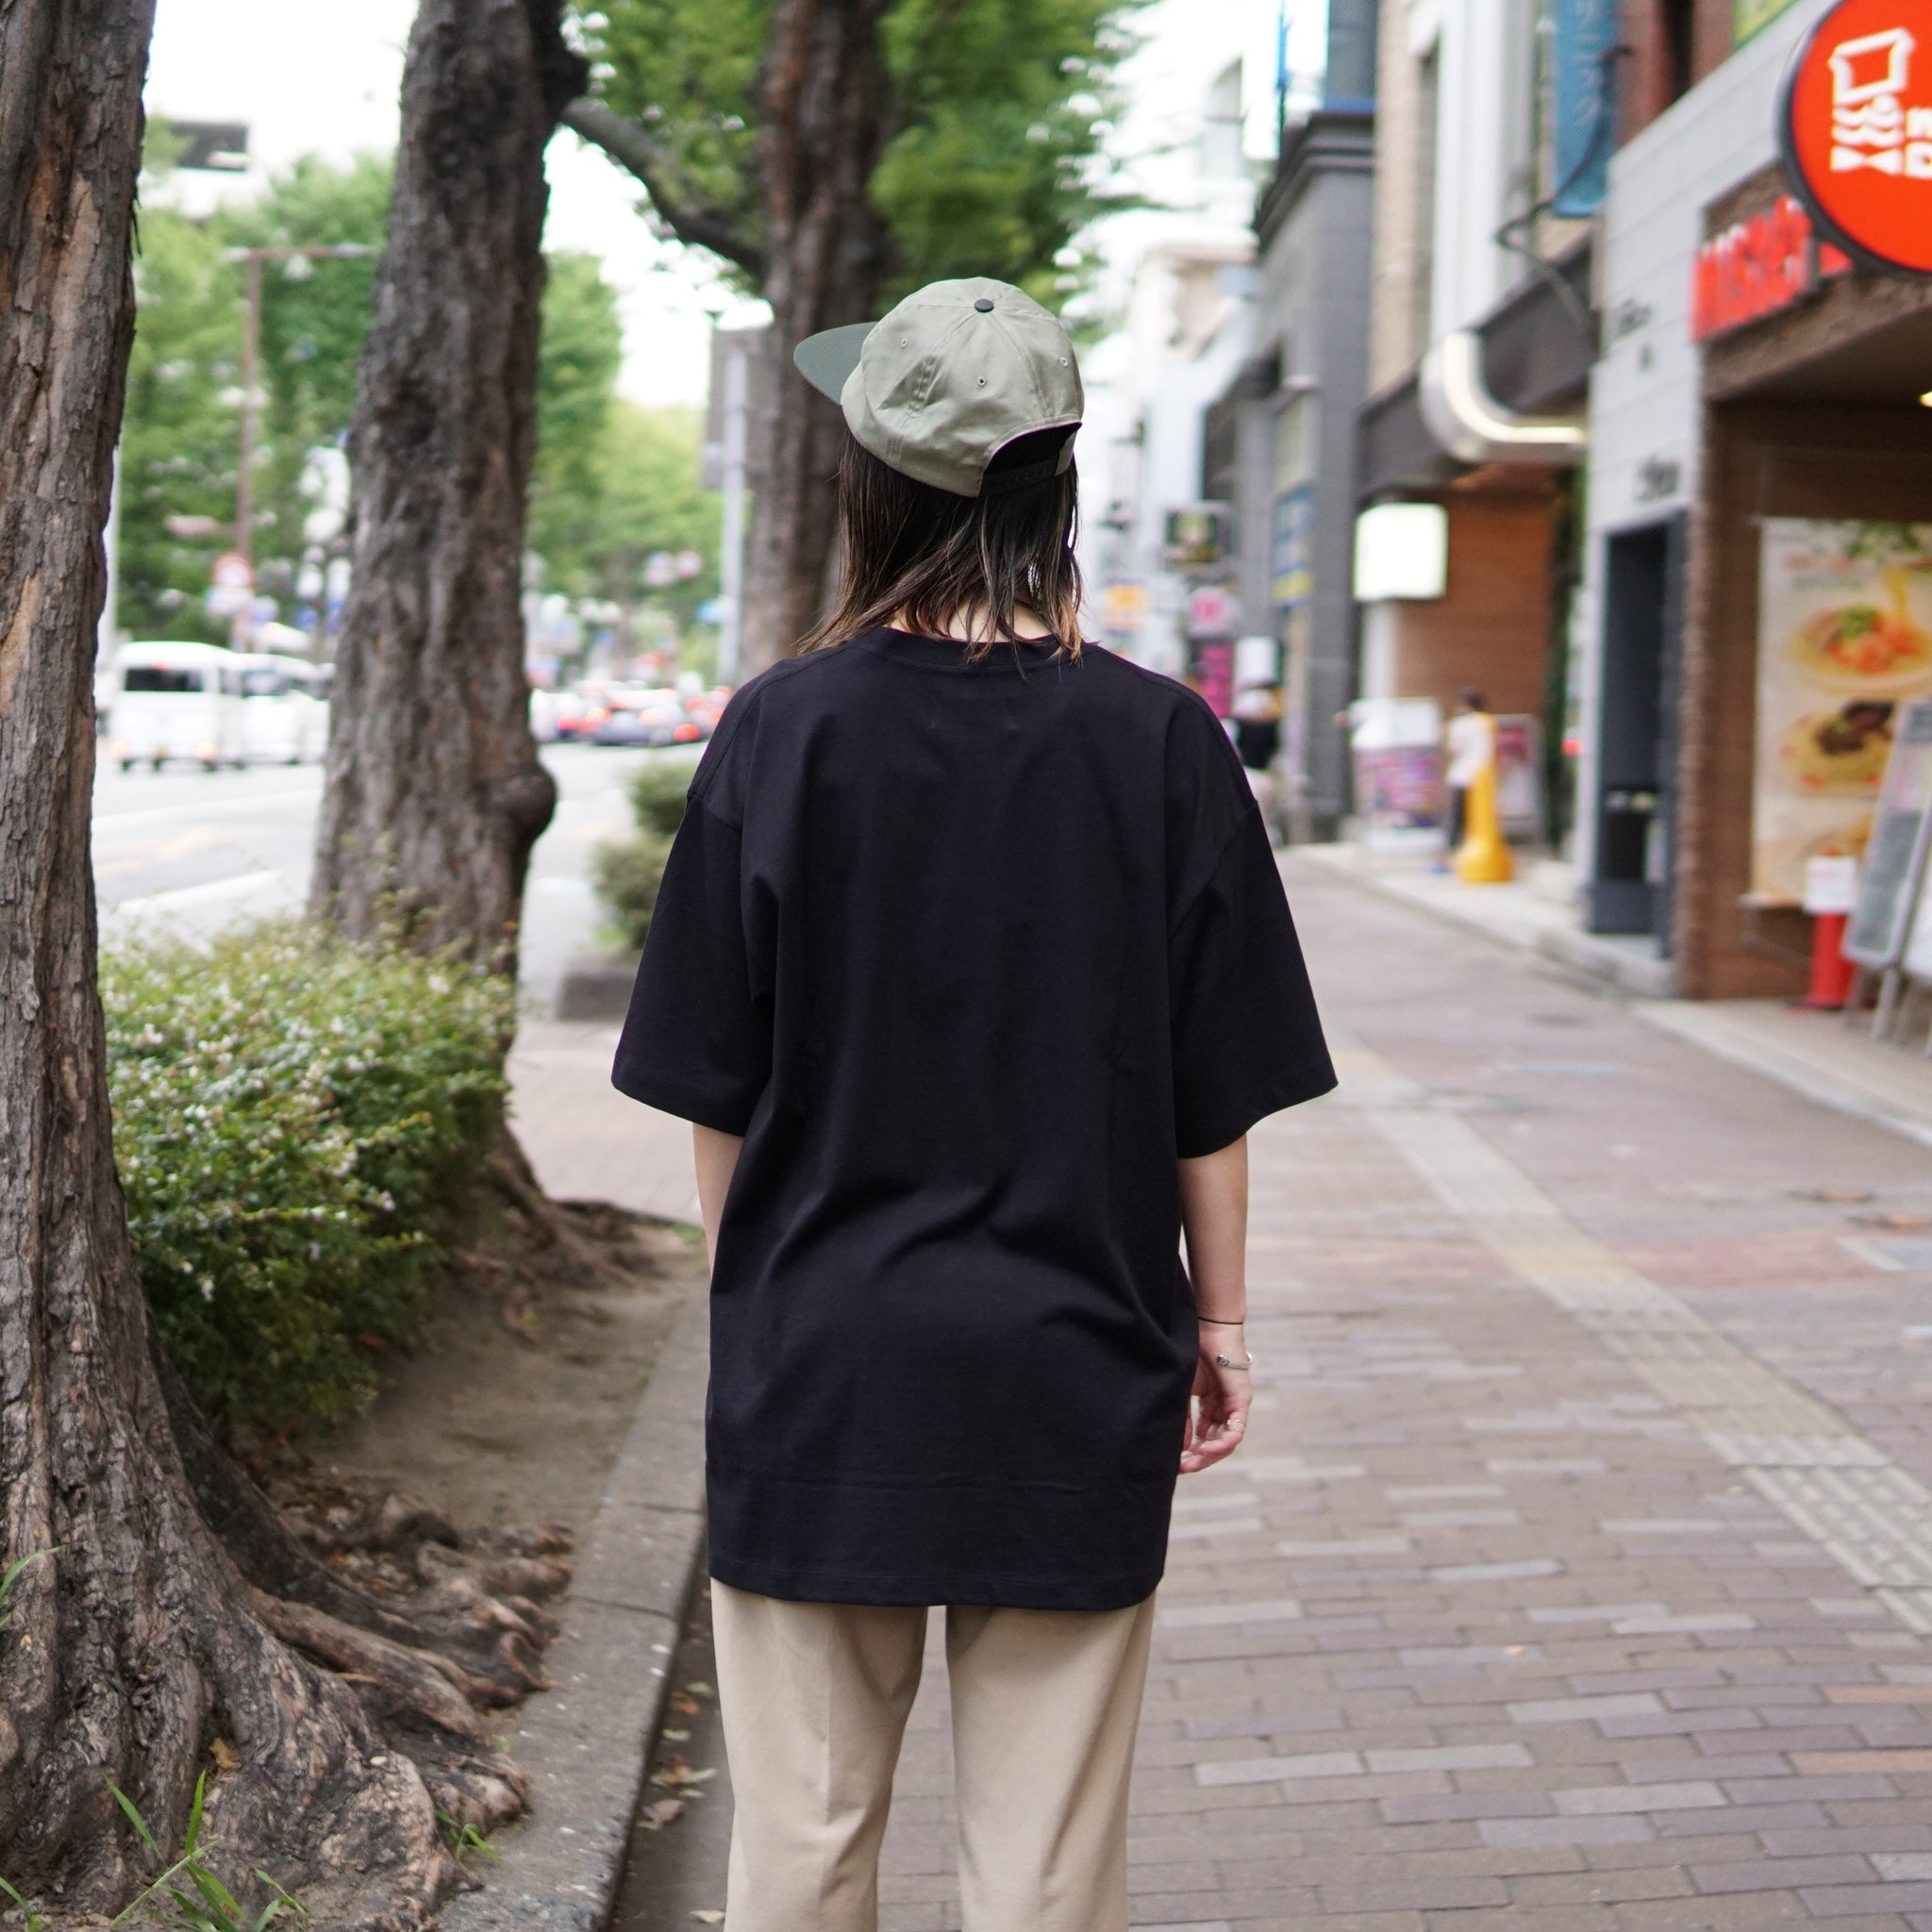 No:TS00183 | Name:TIPSY MOUSE EMBROIDERED SS TEE | Color:Black【TIRED_タイレッド】【ネコポス選択可能】